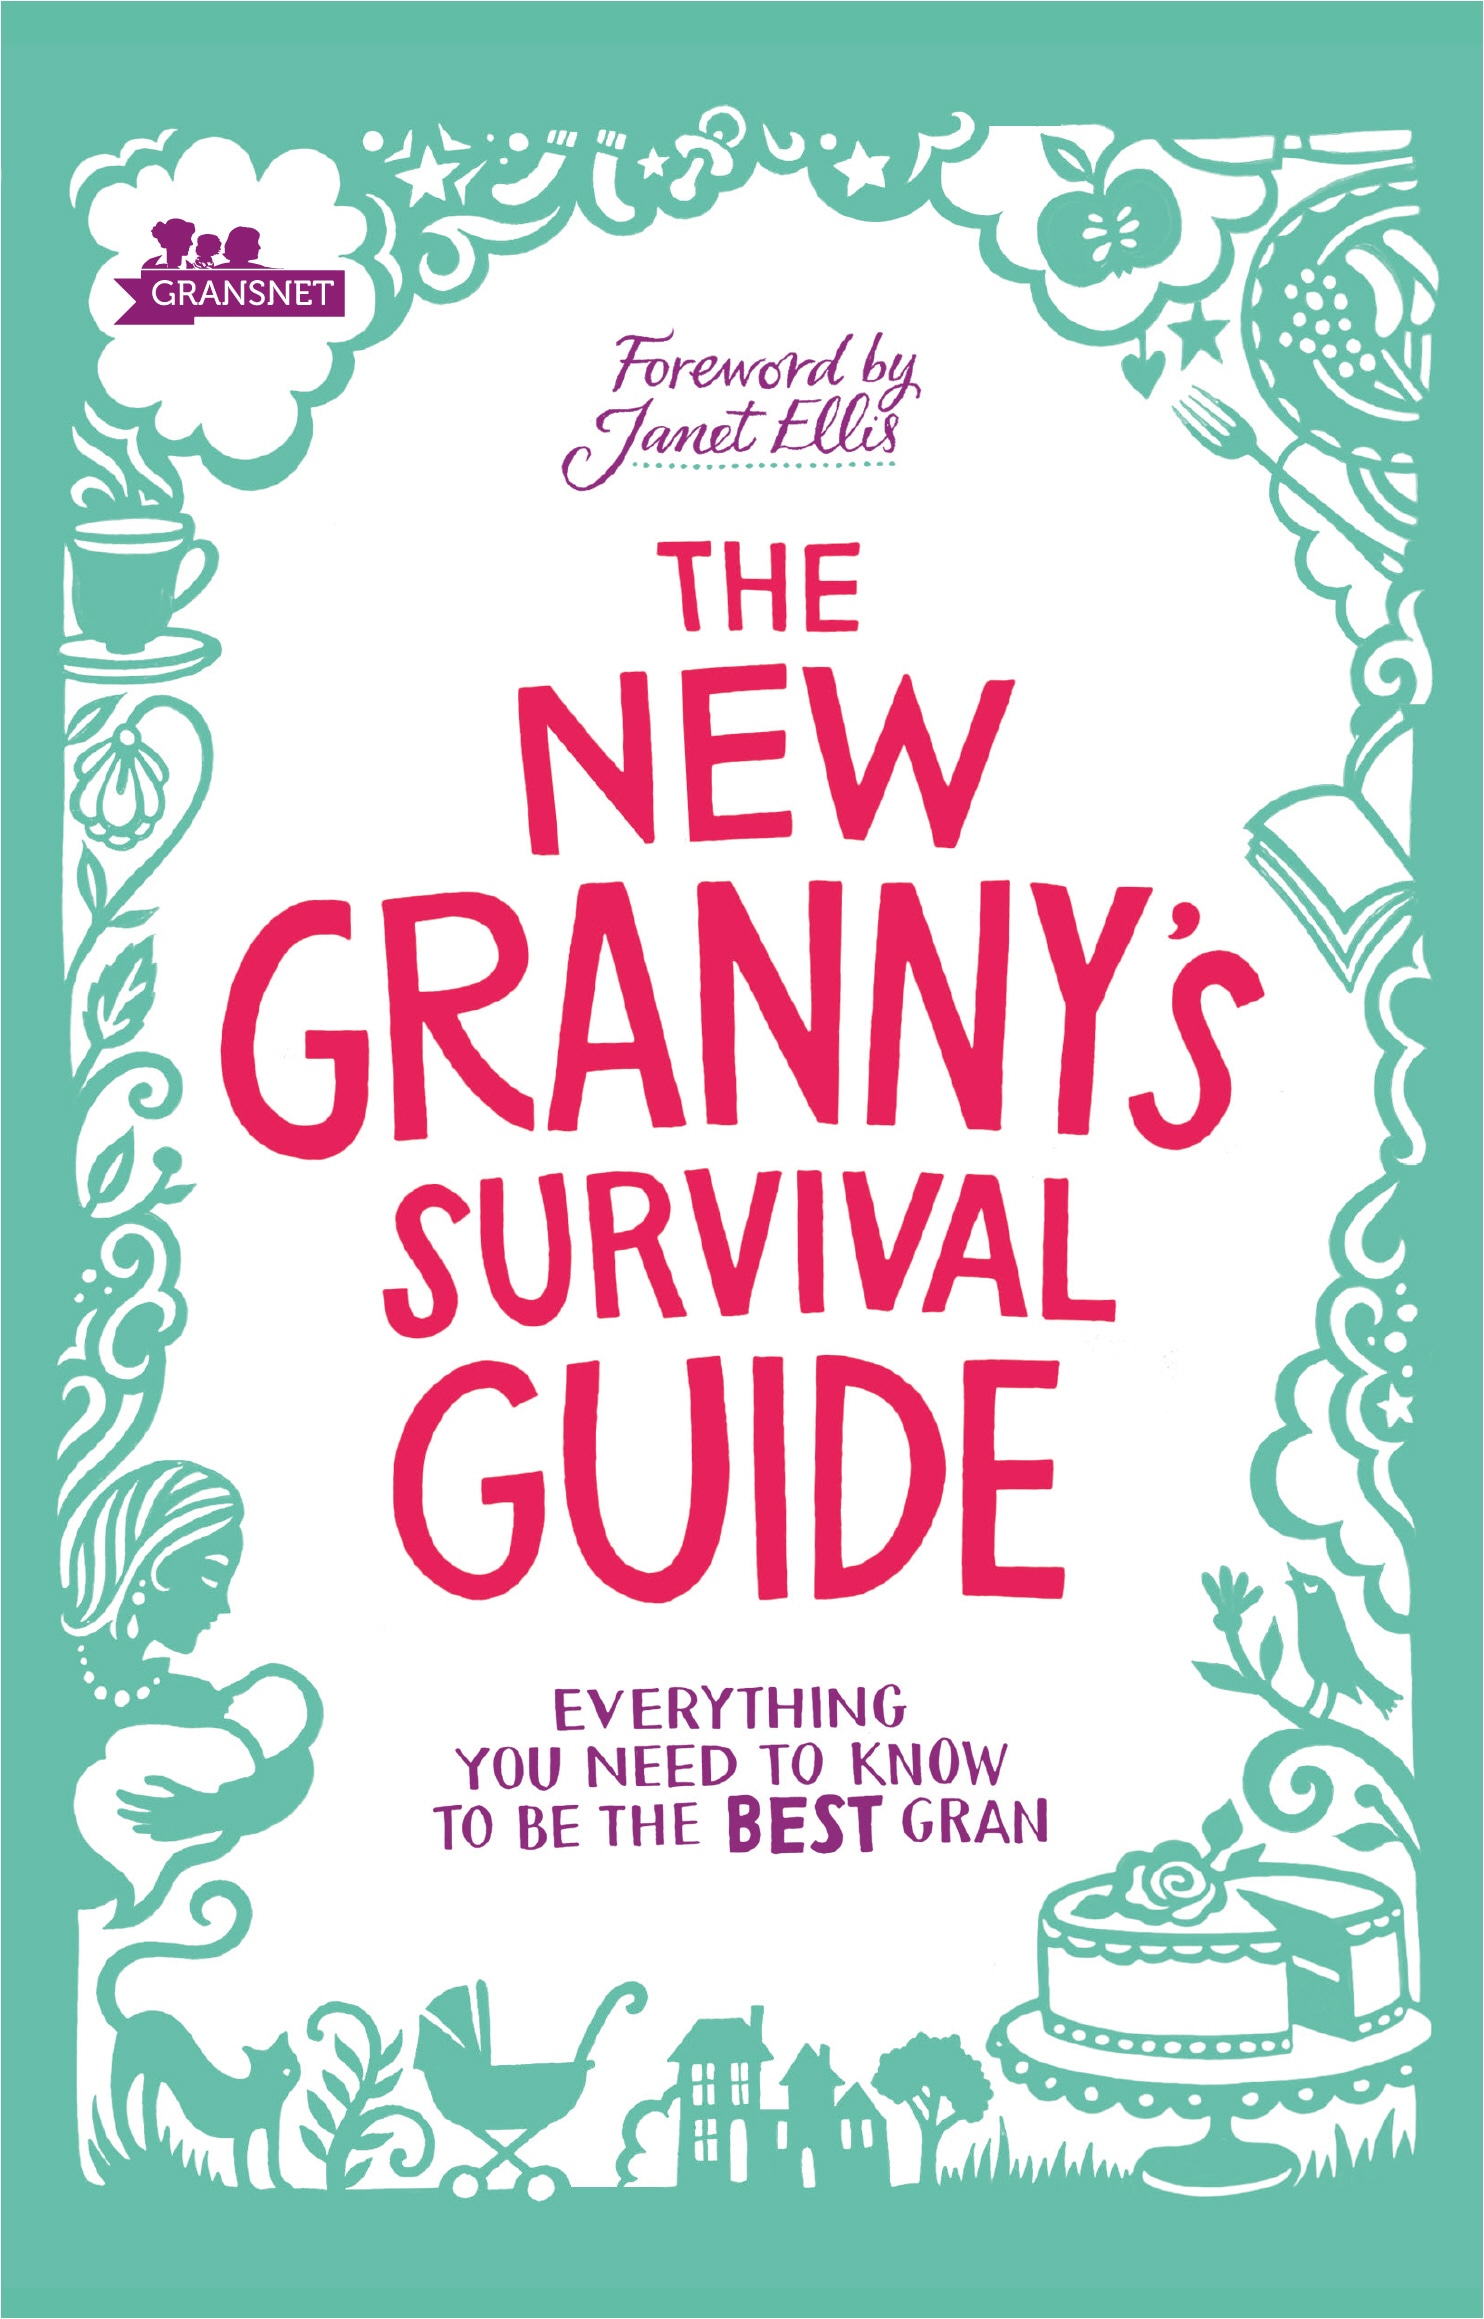 Book “The New Granny’s Survival Guide” by Gransnet — August 1, 2019